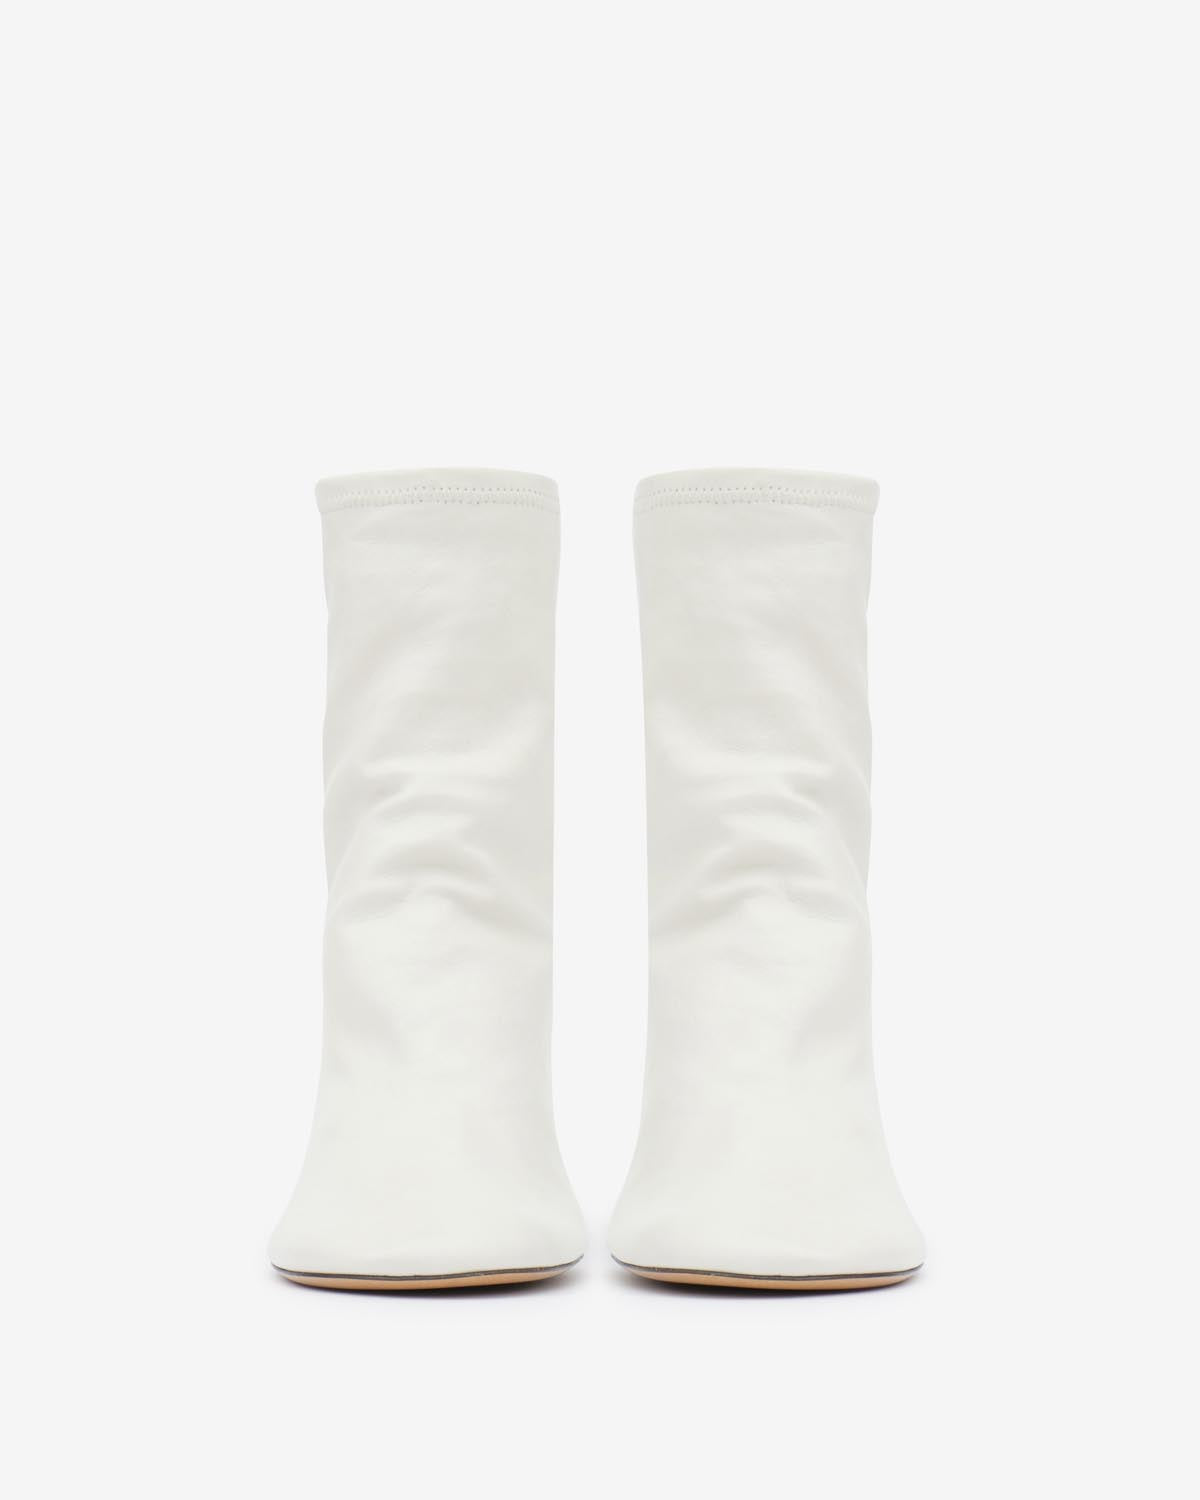 Boots labee Woman Blanc 5